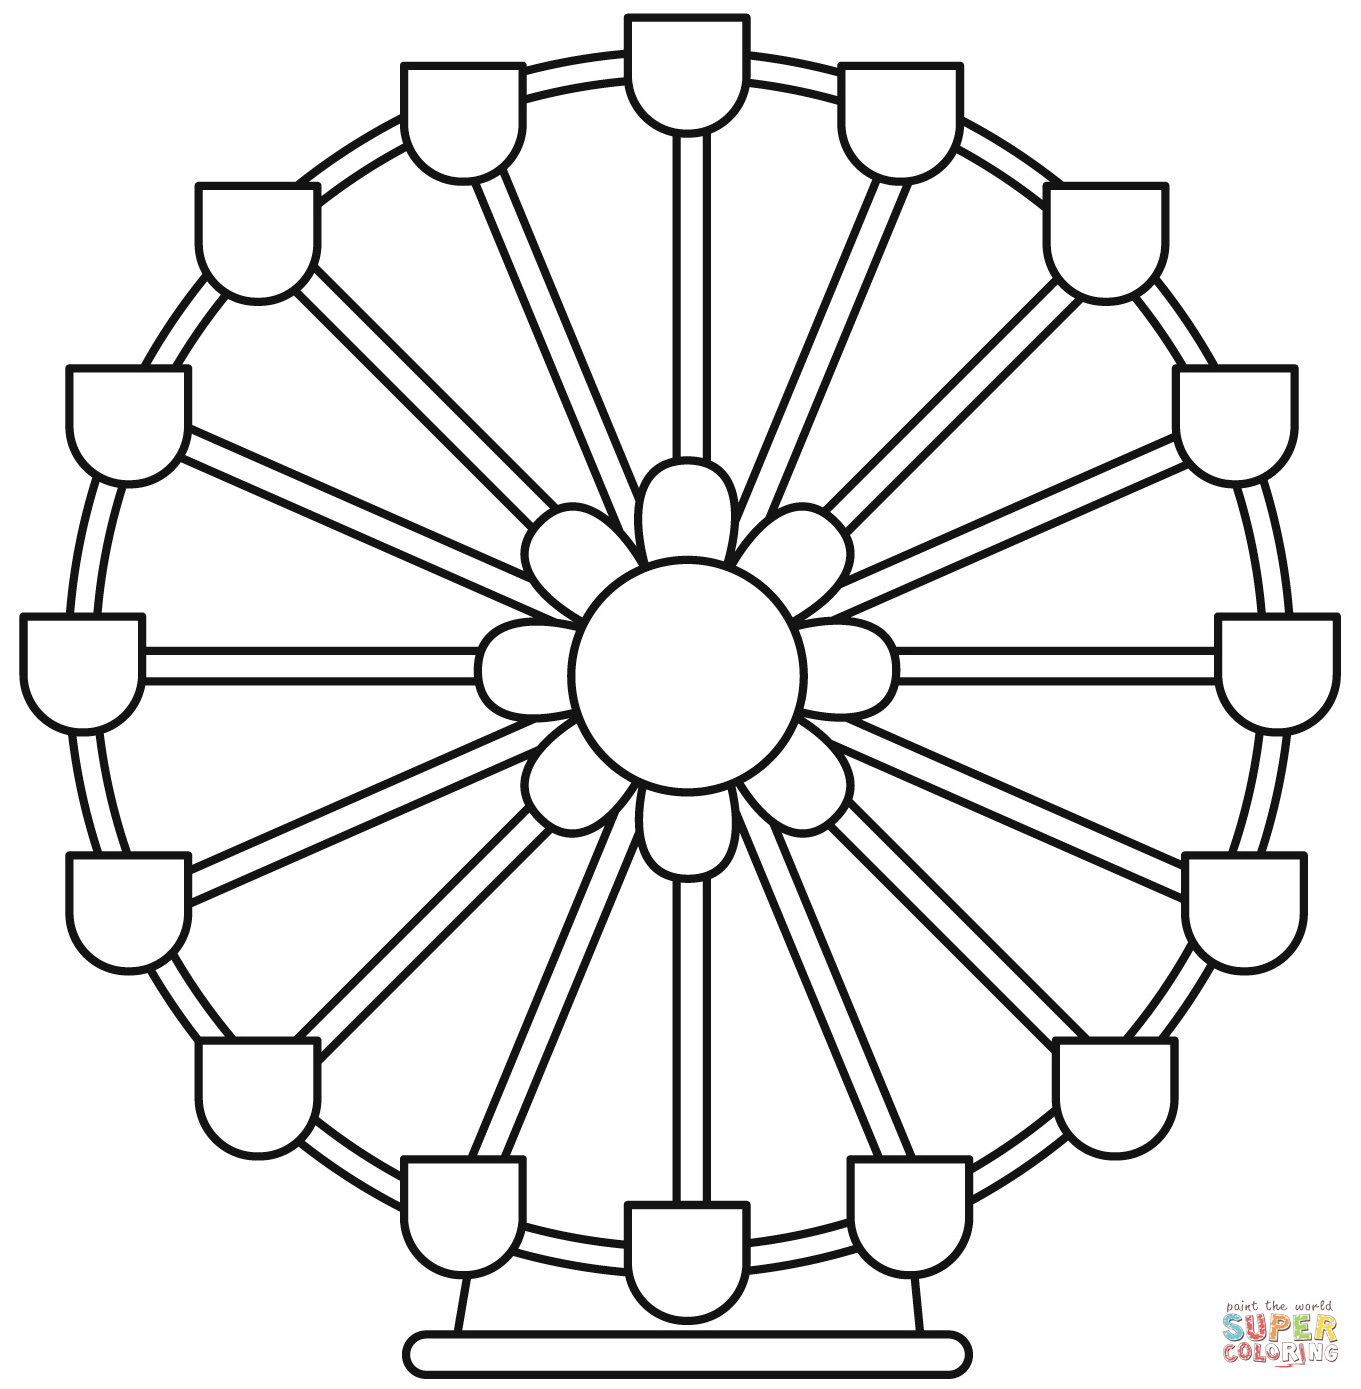 Ferris wheel coloring page free printable coloring pages